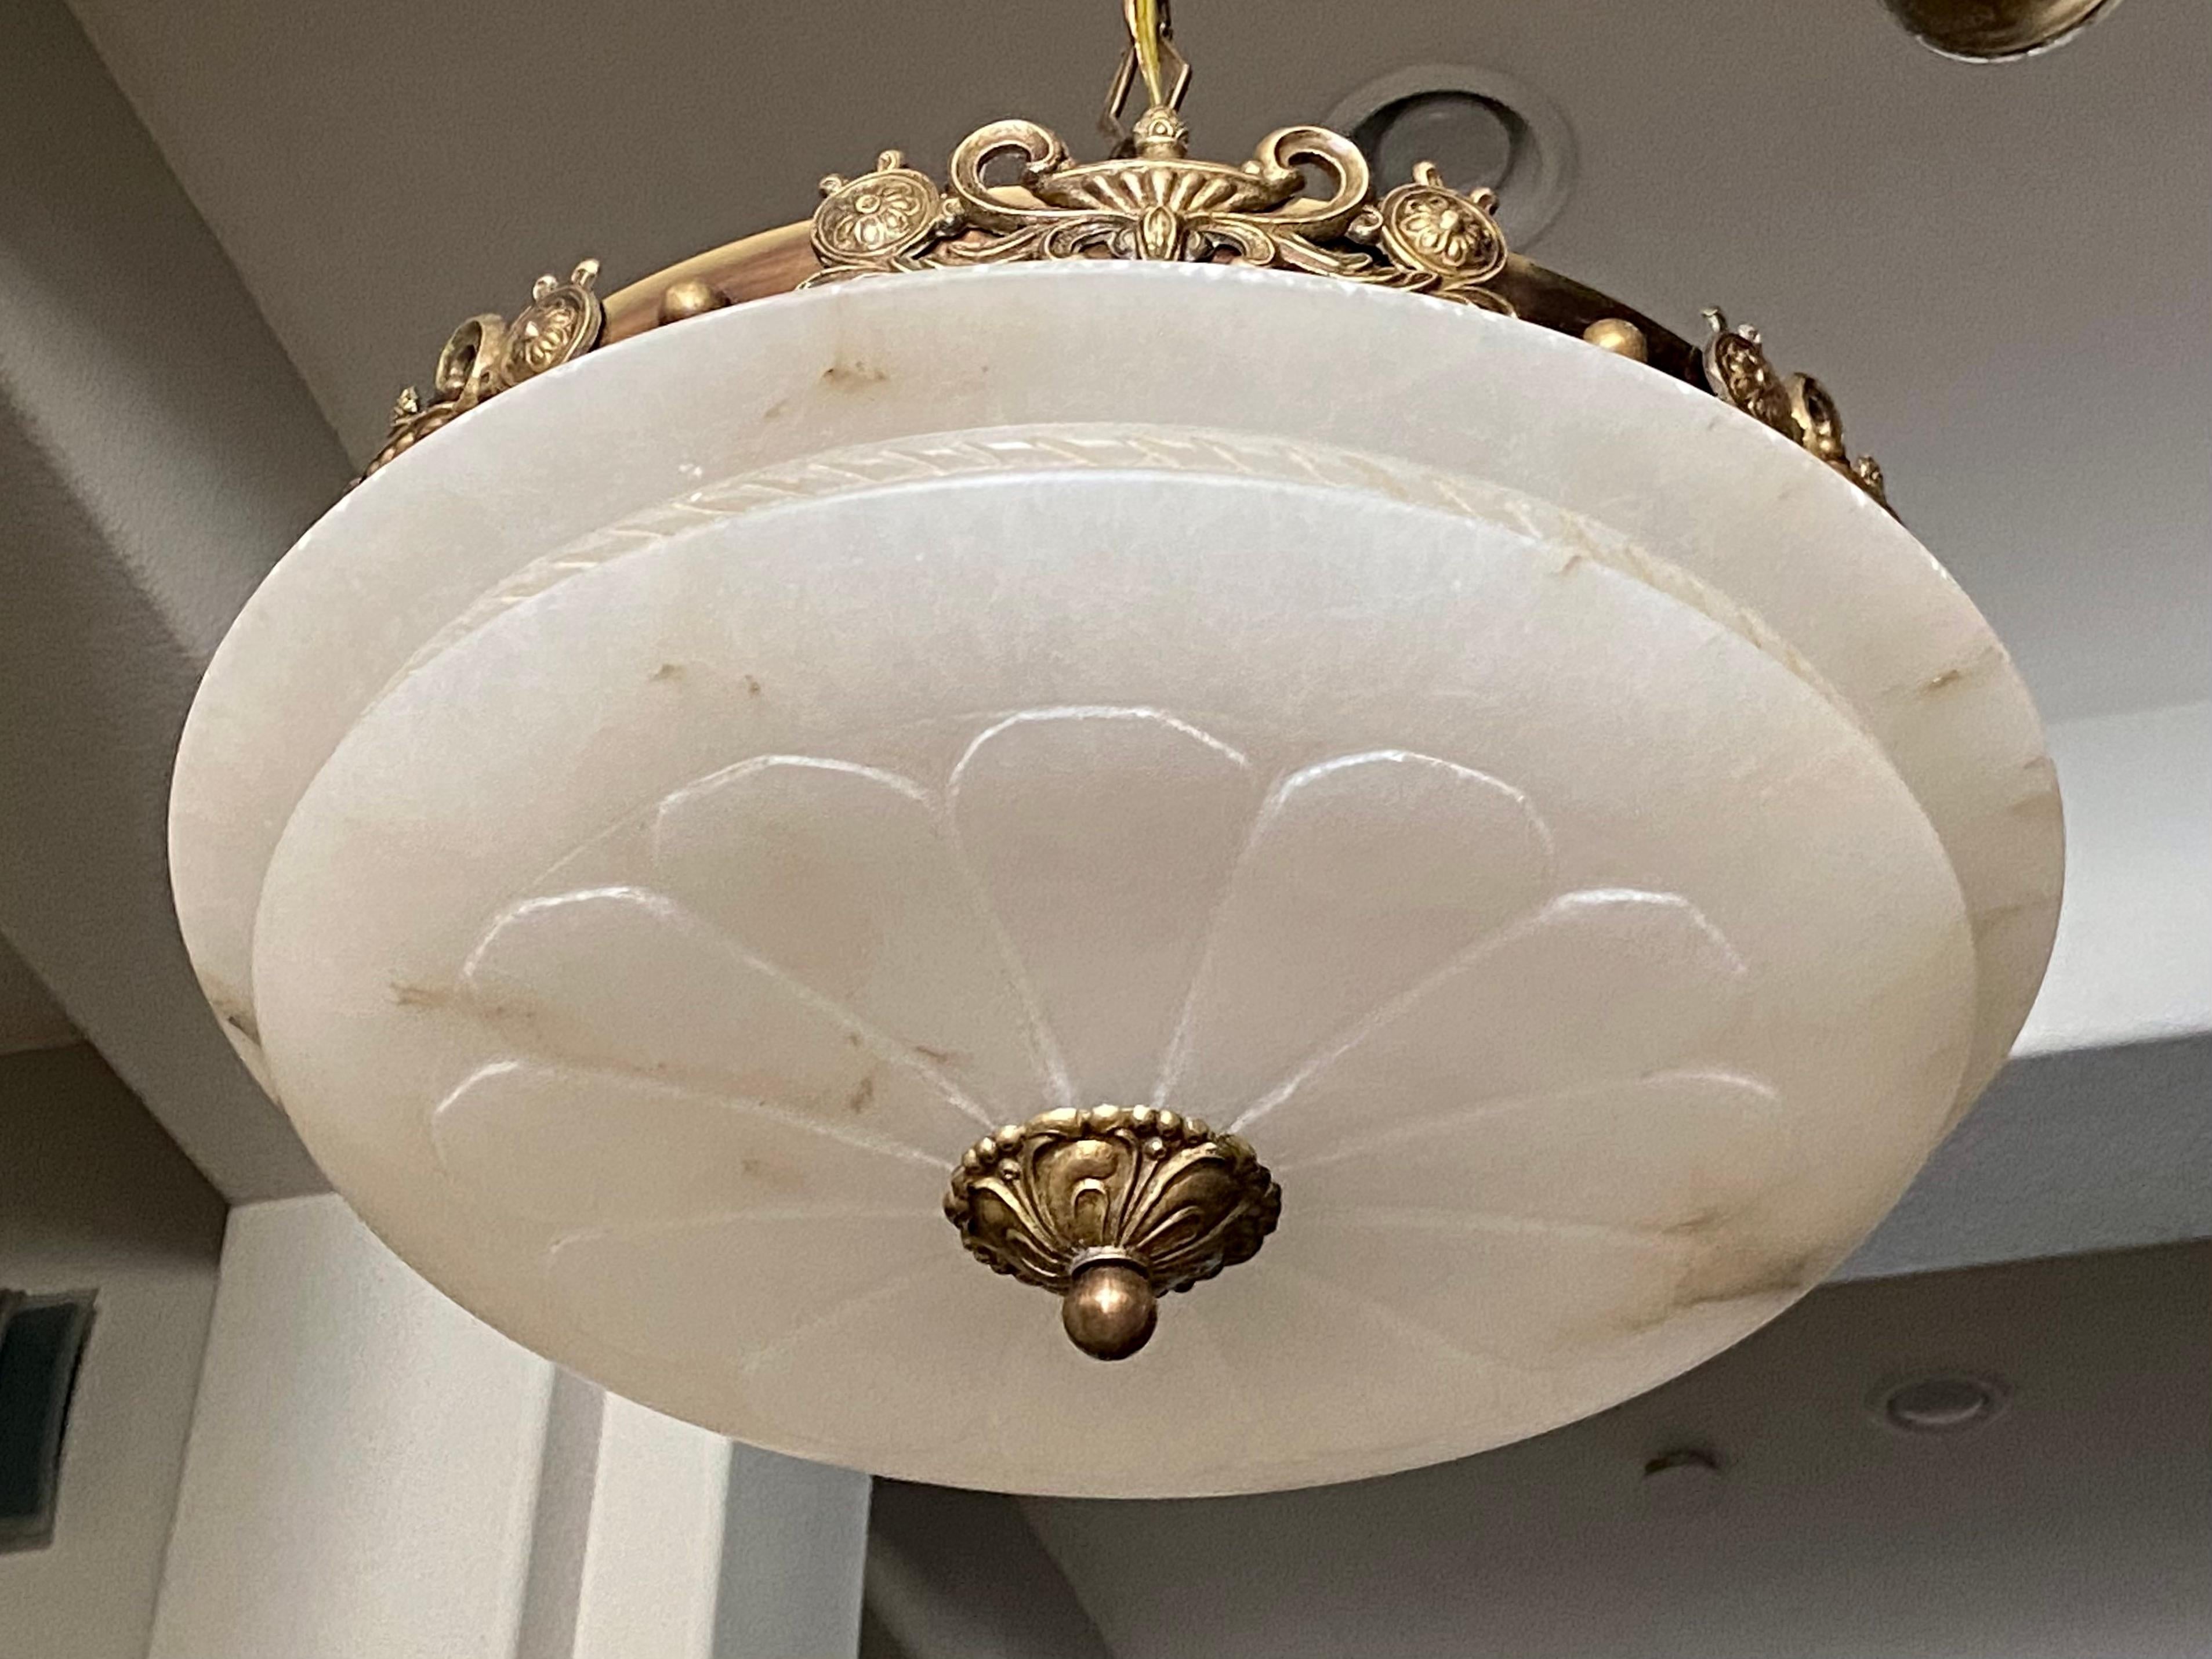 Alabaster pendant light or chandelier with aged patinated brass fittings in the Directoire style. Wired for US, fixture uses three candelabra or 